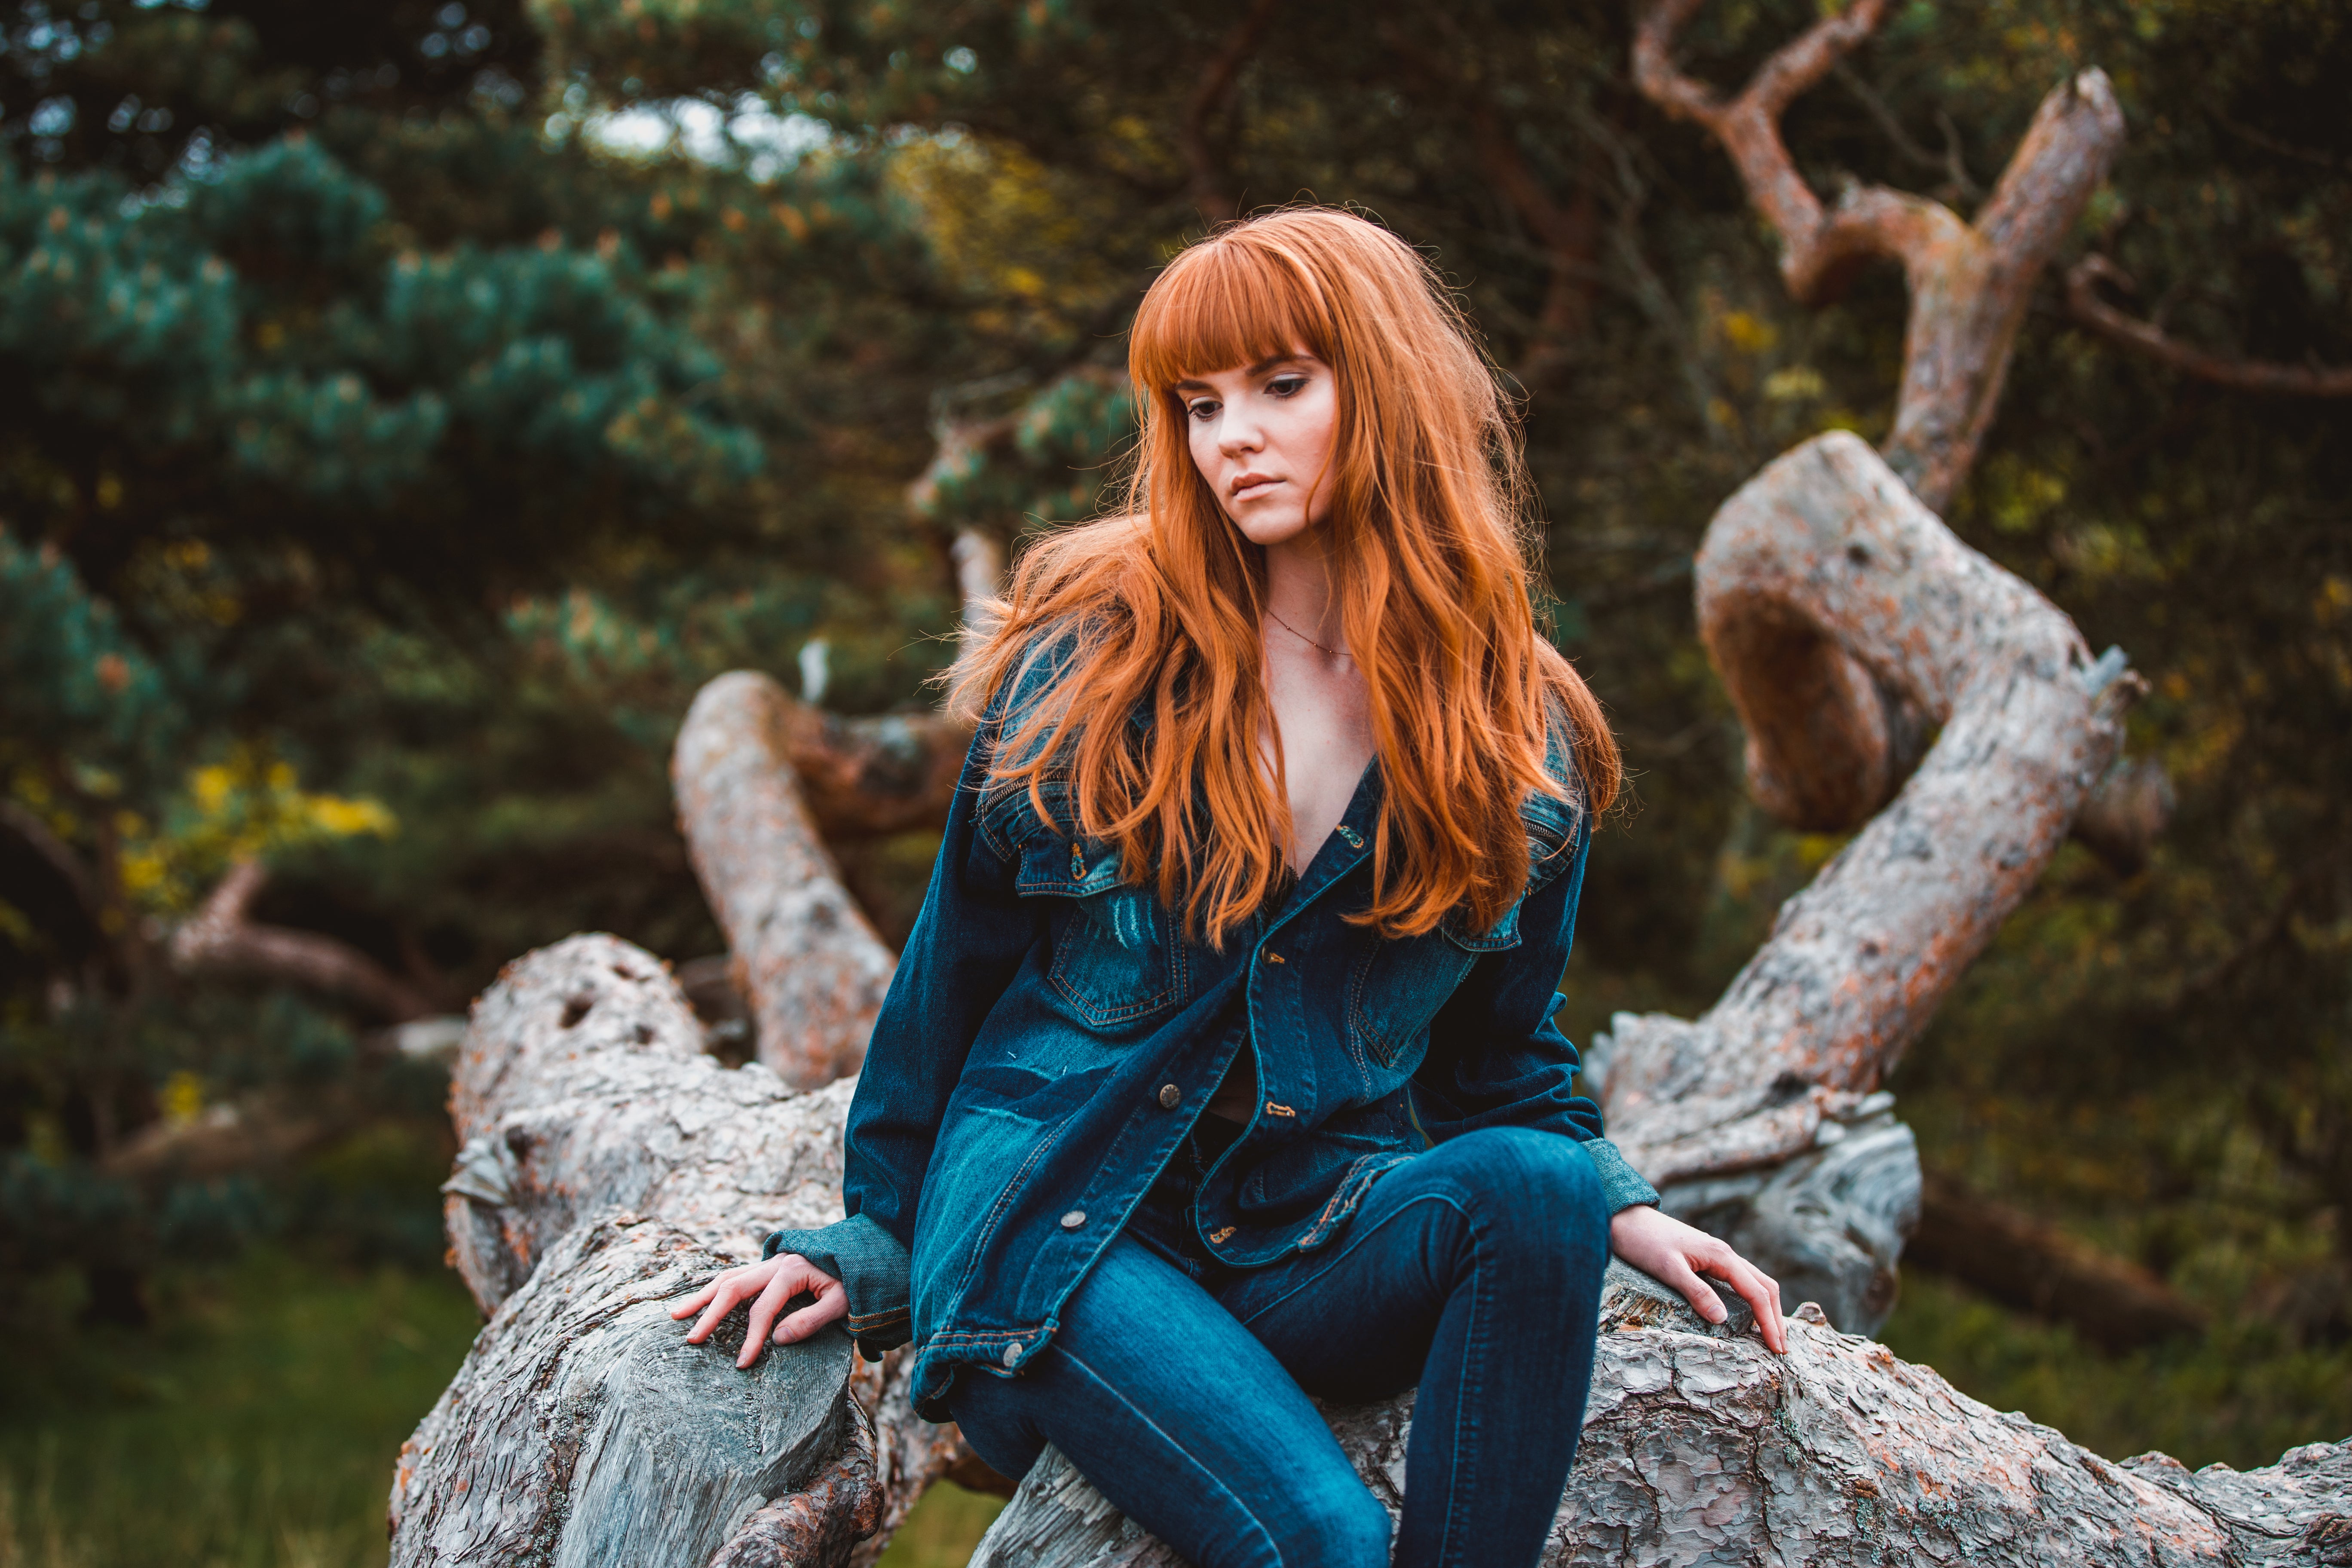 A female model with ginger wavy hair and a fringe is sitting on a tree in a forest. She has a neutral expression on her face and is looking slightly to her right. She is wearing a blue shirt and blue jeans.